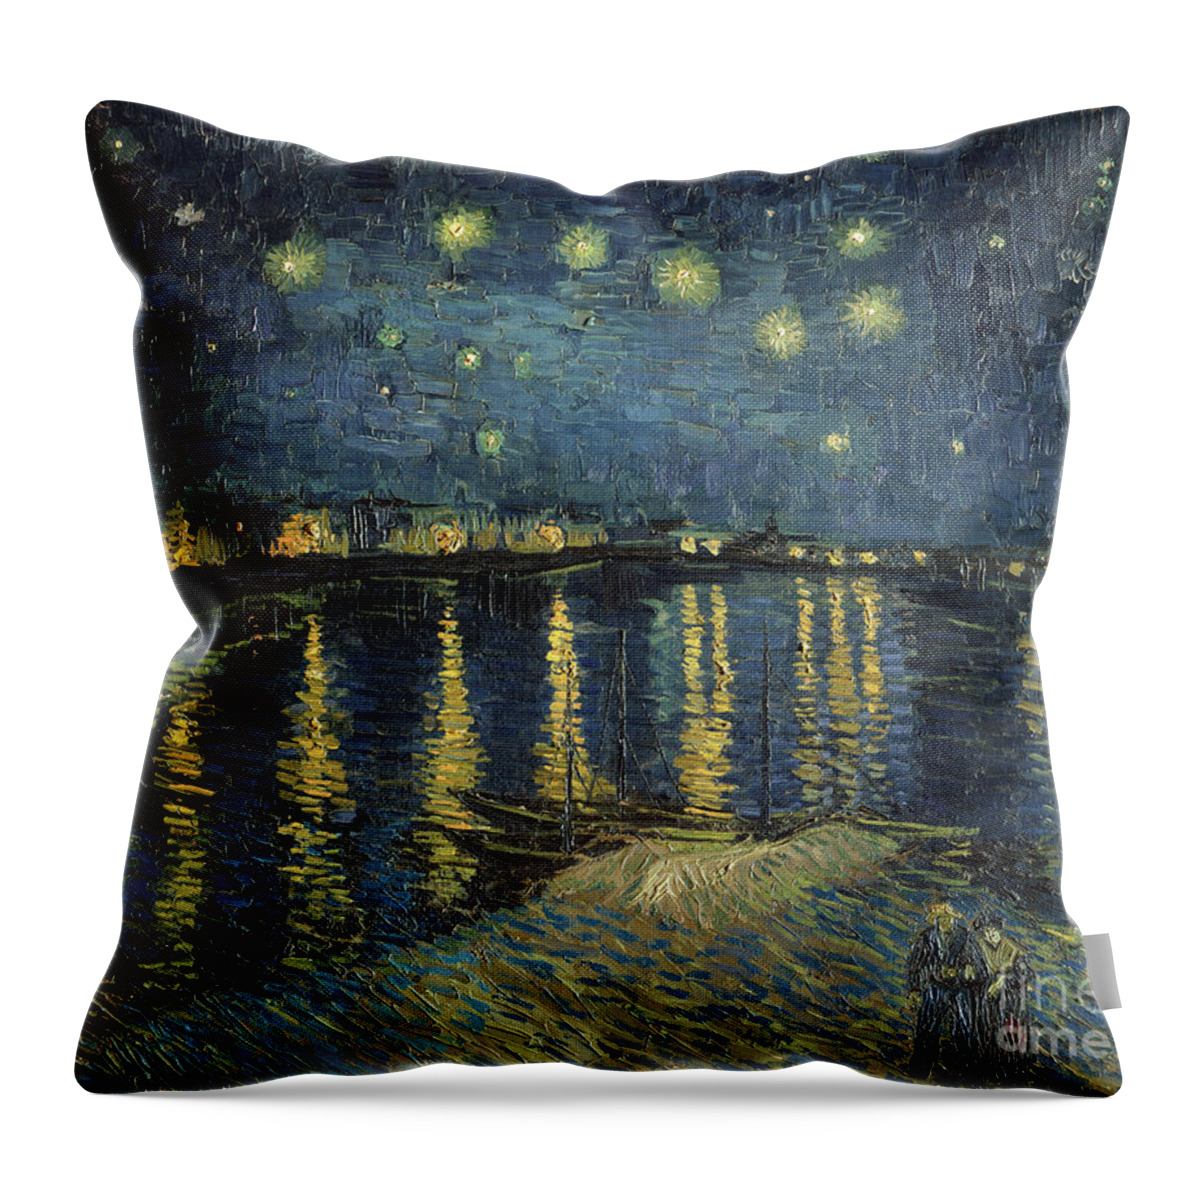 The Throw Pillow featuring the painting The Starry Night by Vincent Van Gogh